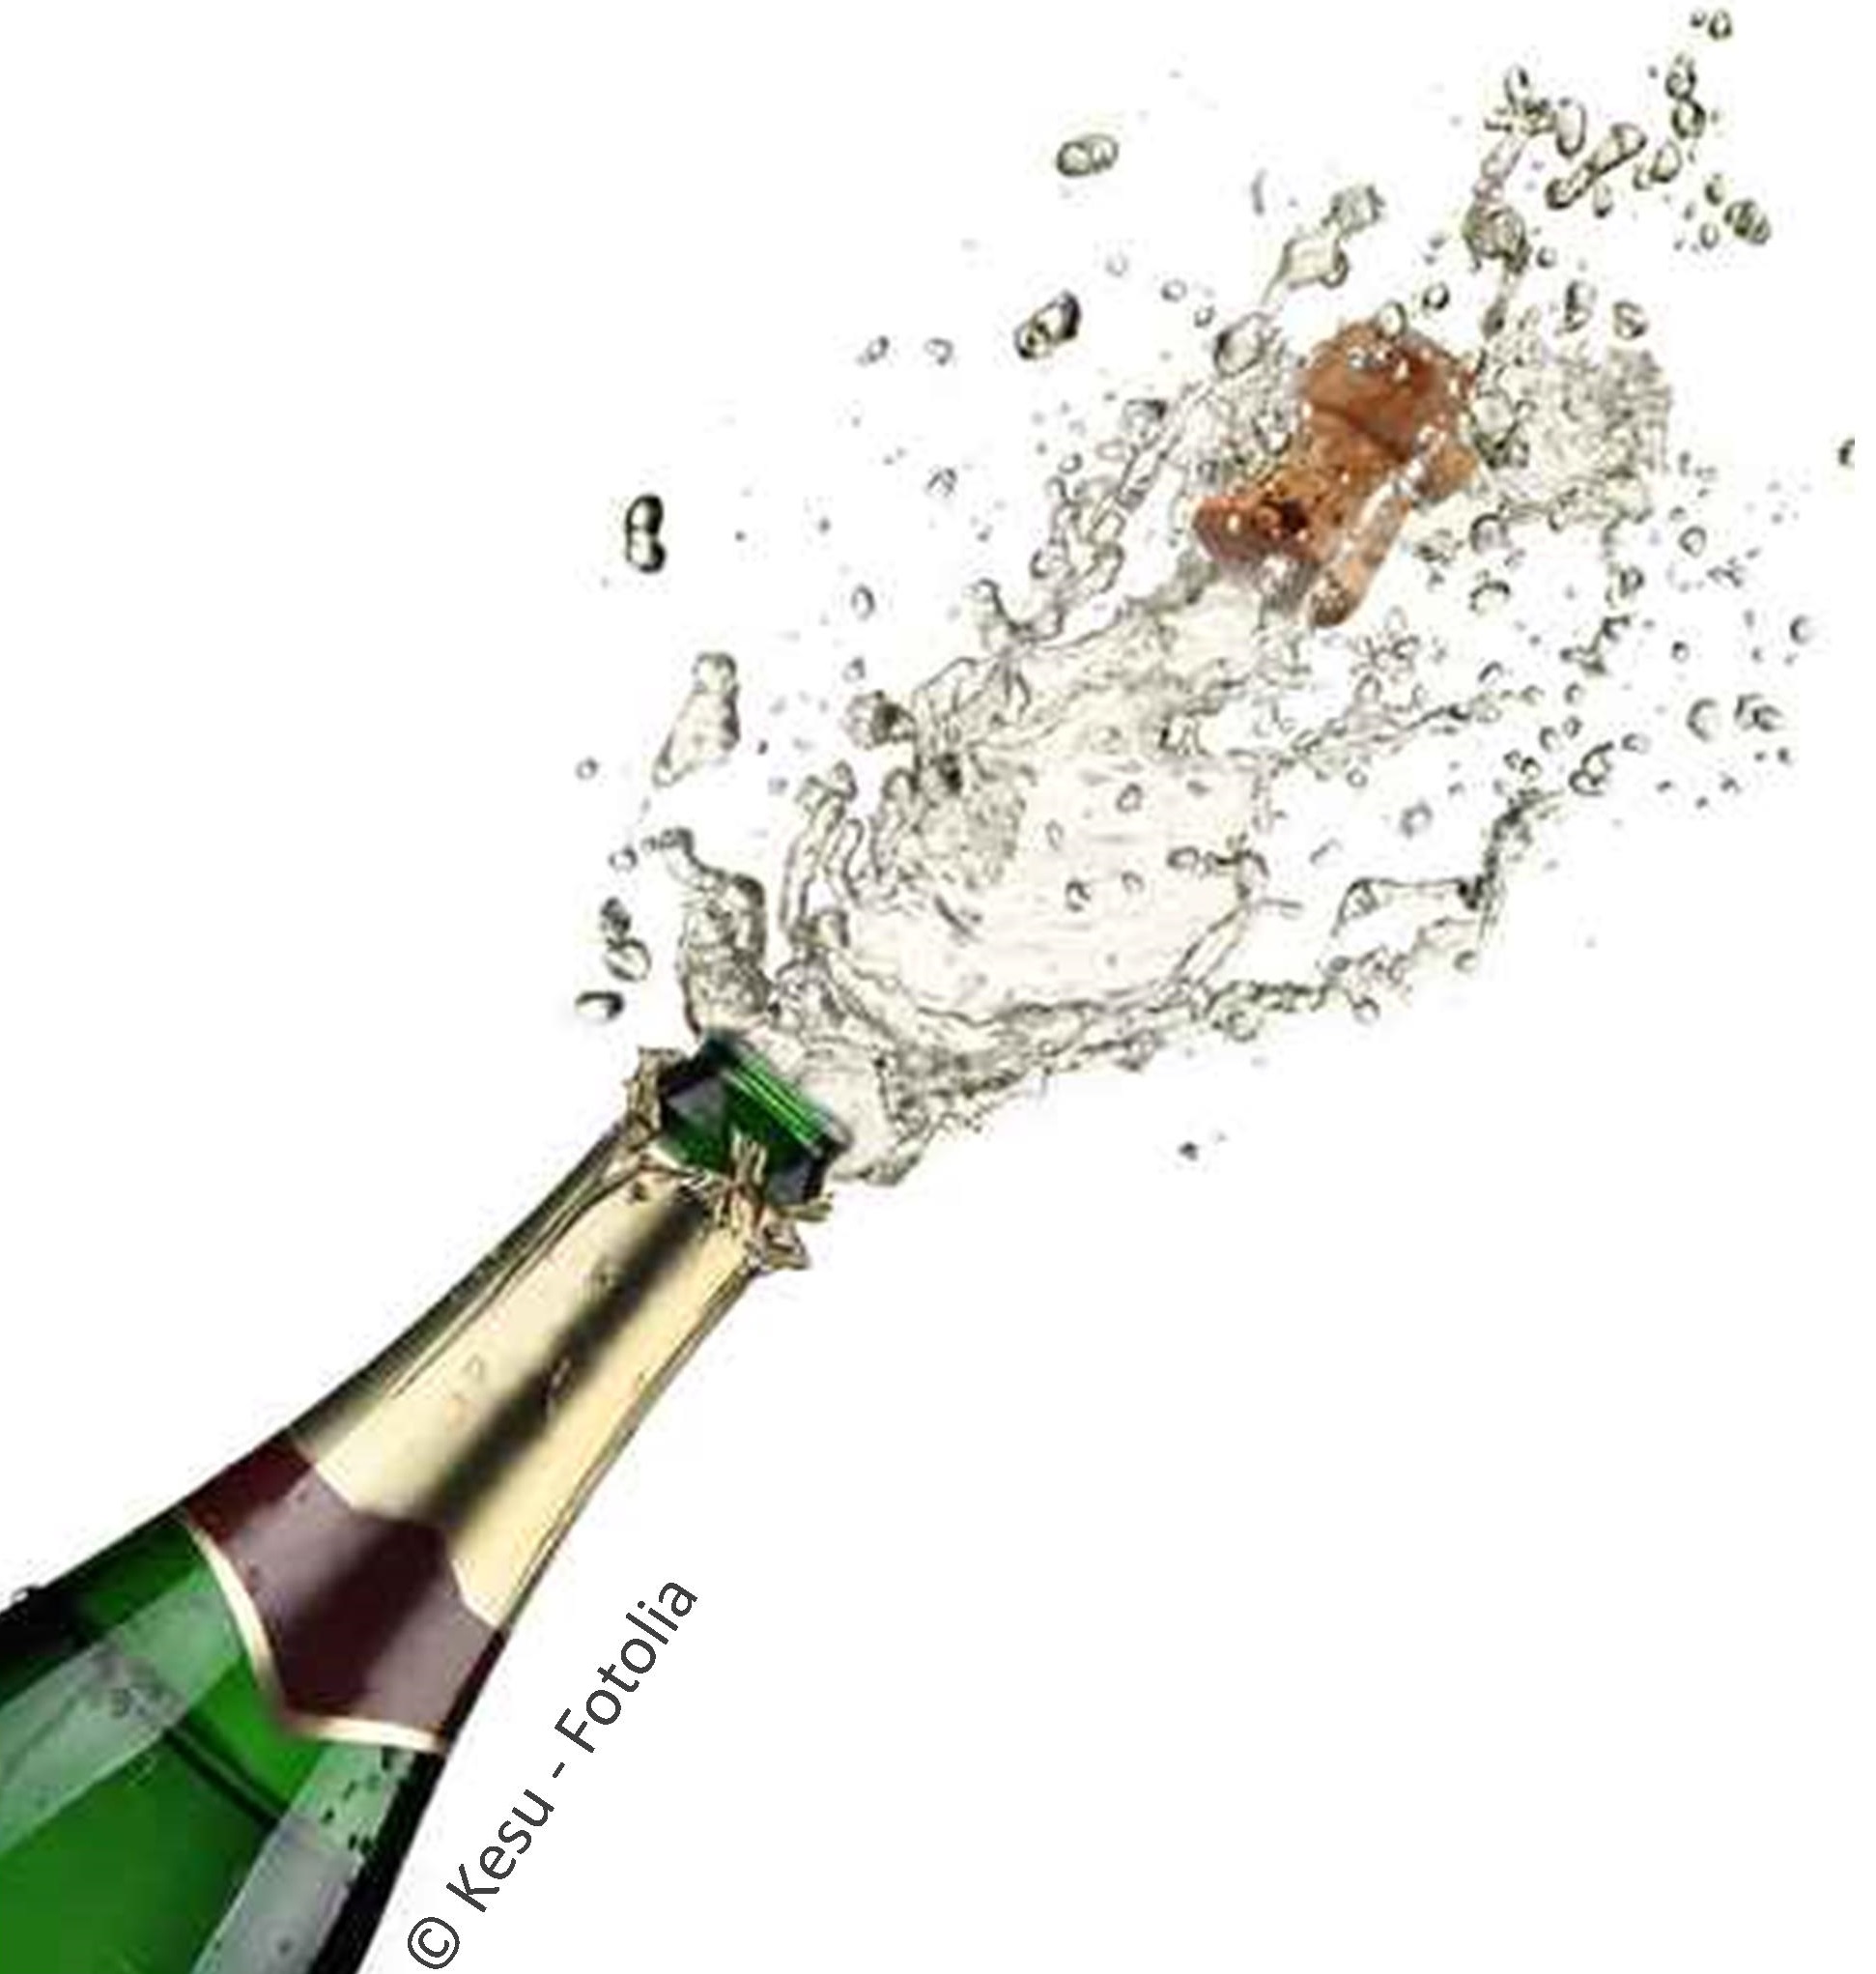 Champagne-bottle-with-copyright.jpg